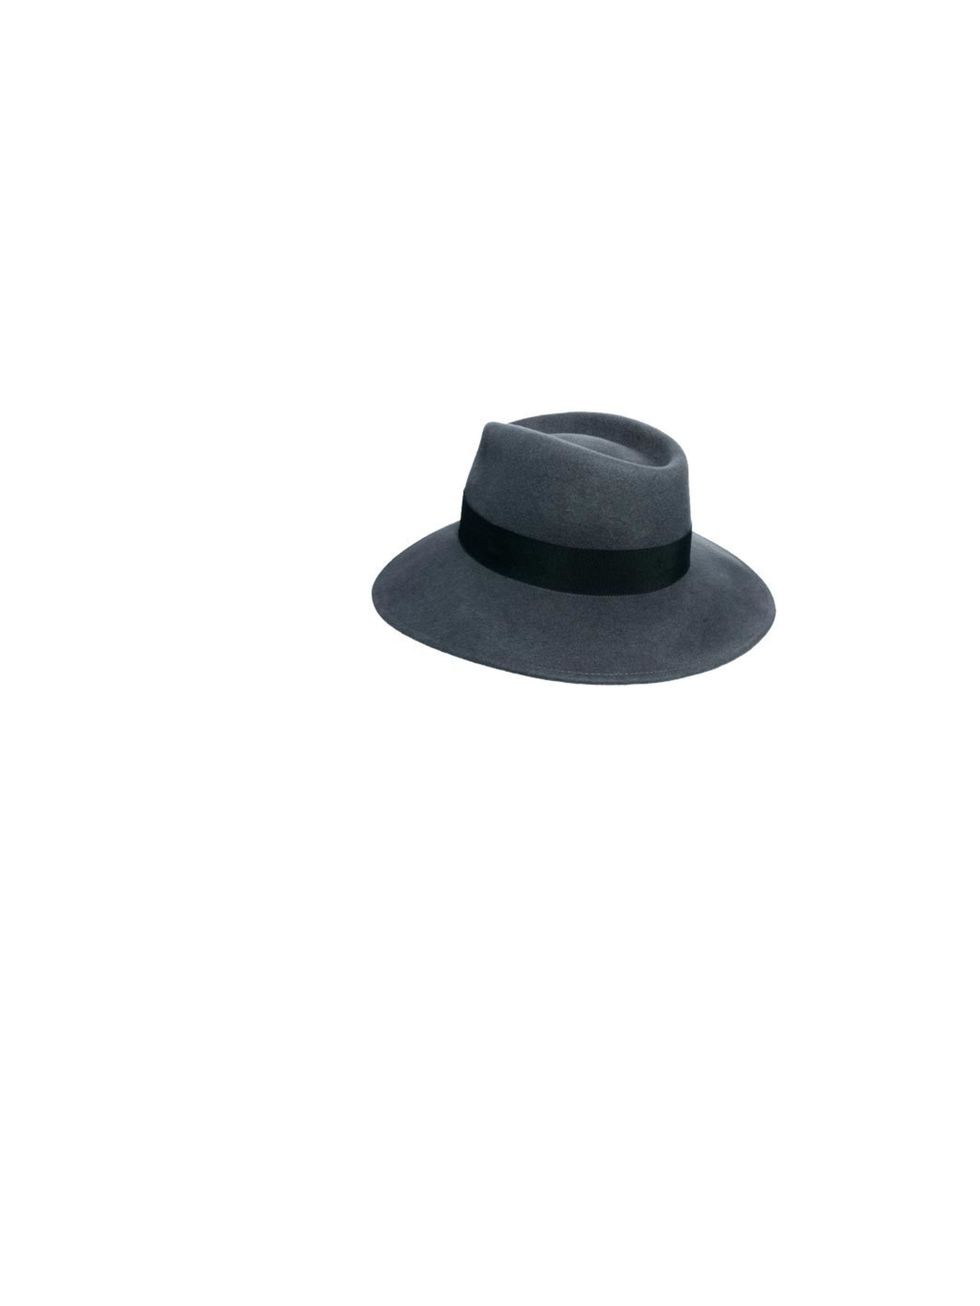 <p>Add a dash of drama to daytime looks with this Whistles fedora £55, at <a href="http://www.asos.com/Whistles/Whistles-Ribbon-Trim-Wool-Felt-Fedora/Prod/pgeproduct.aspx?iid=3391422&amp;cid=6139&amp;sh=0&amp;pge=0&amp;pgesize=204&amp;sort=-1&amp;clr=Grey